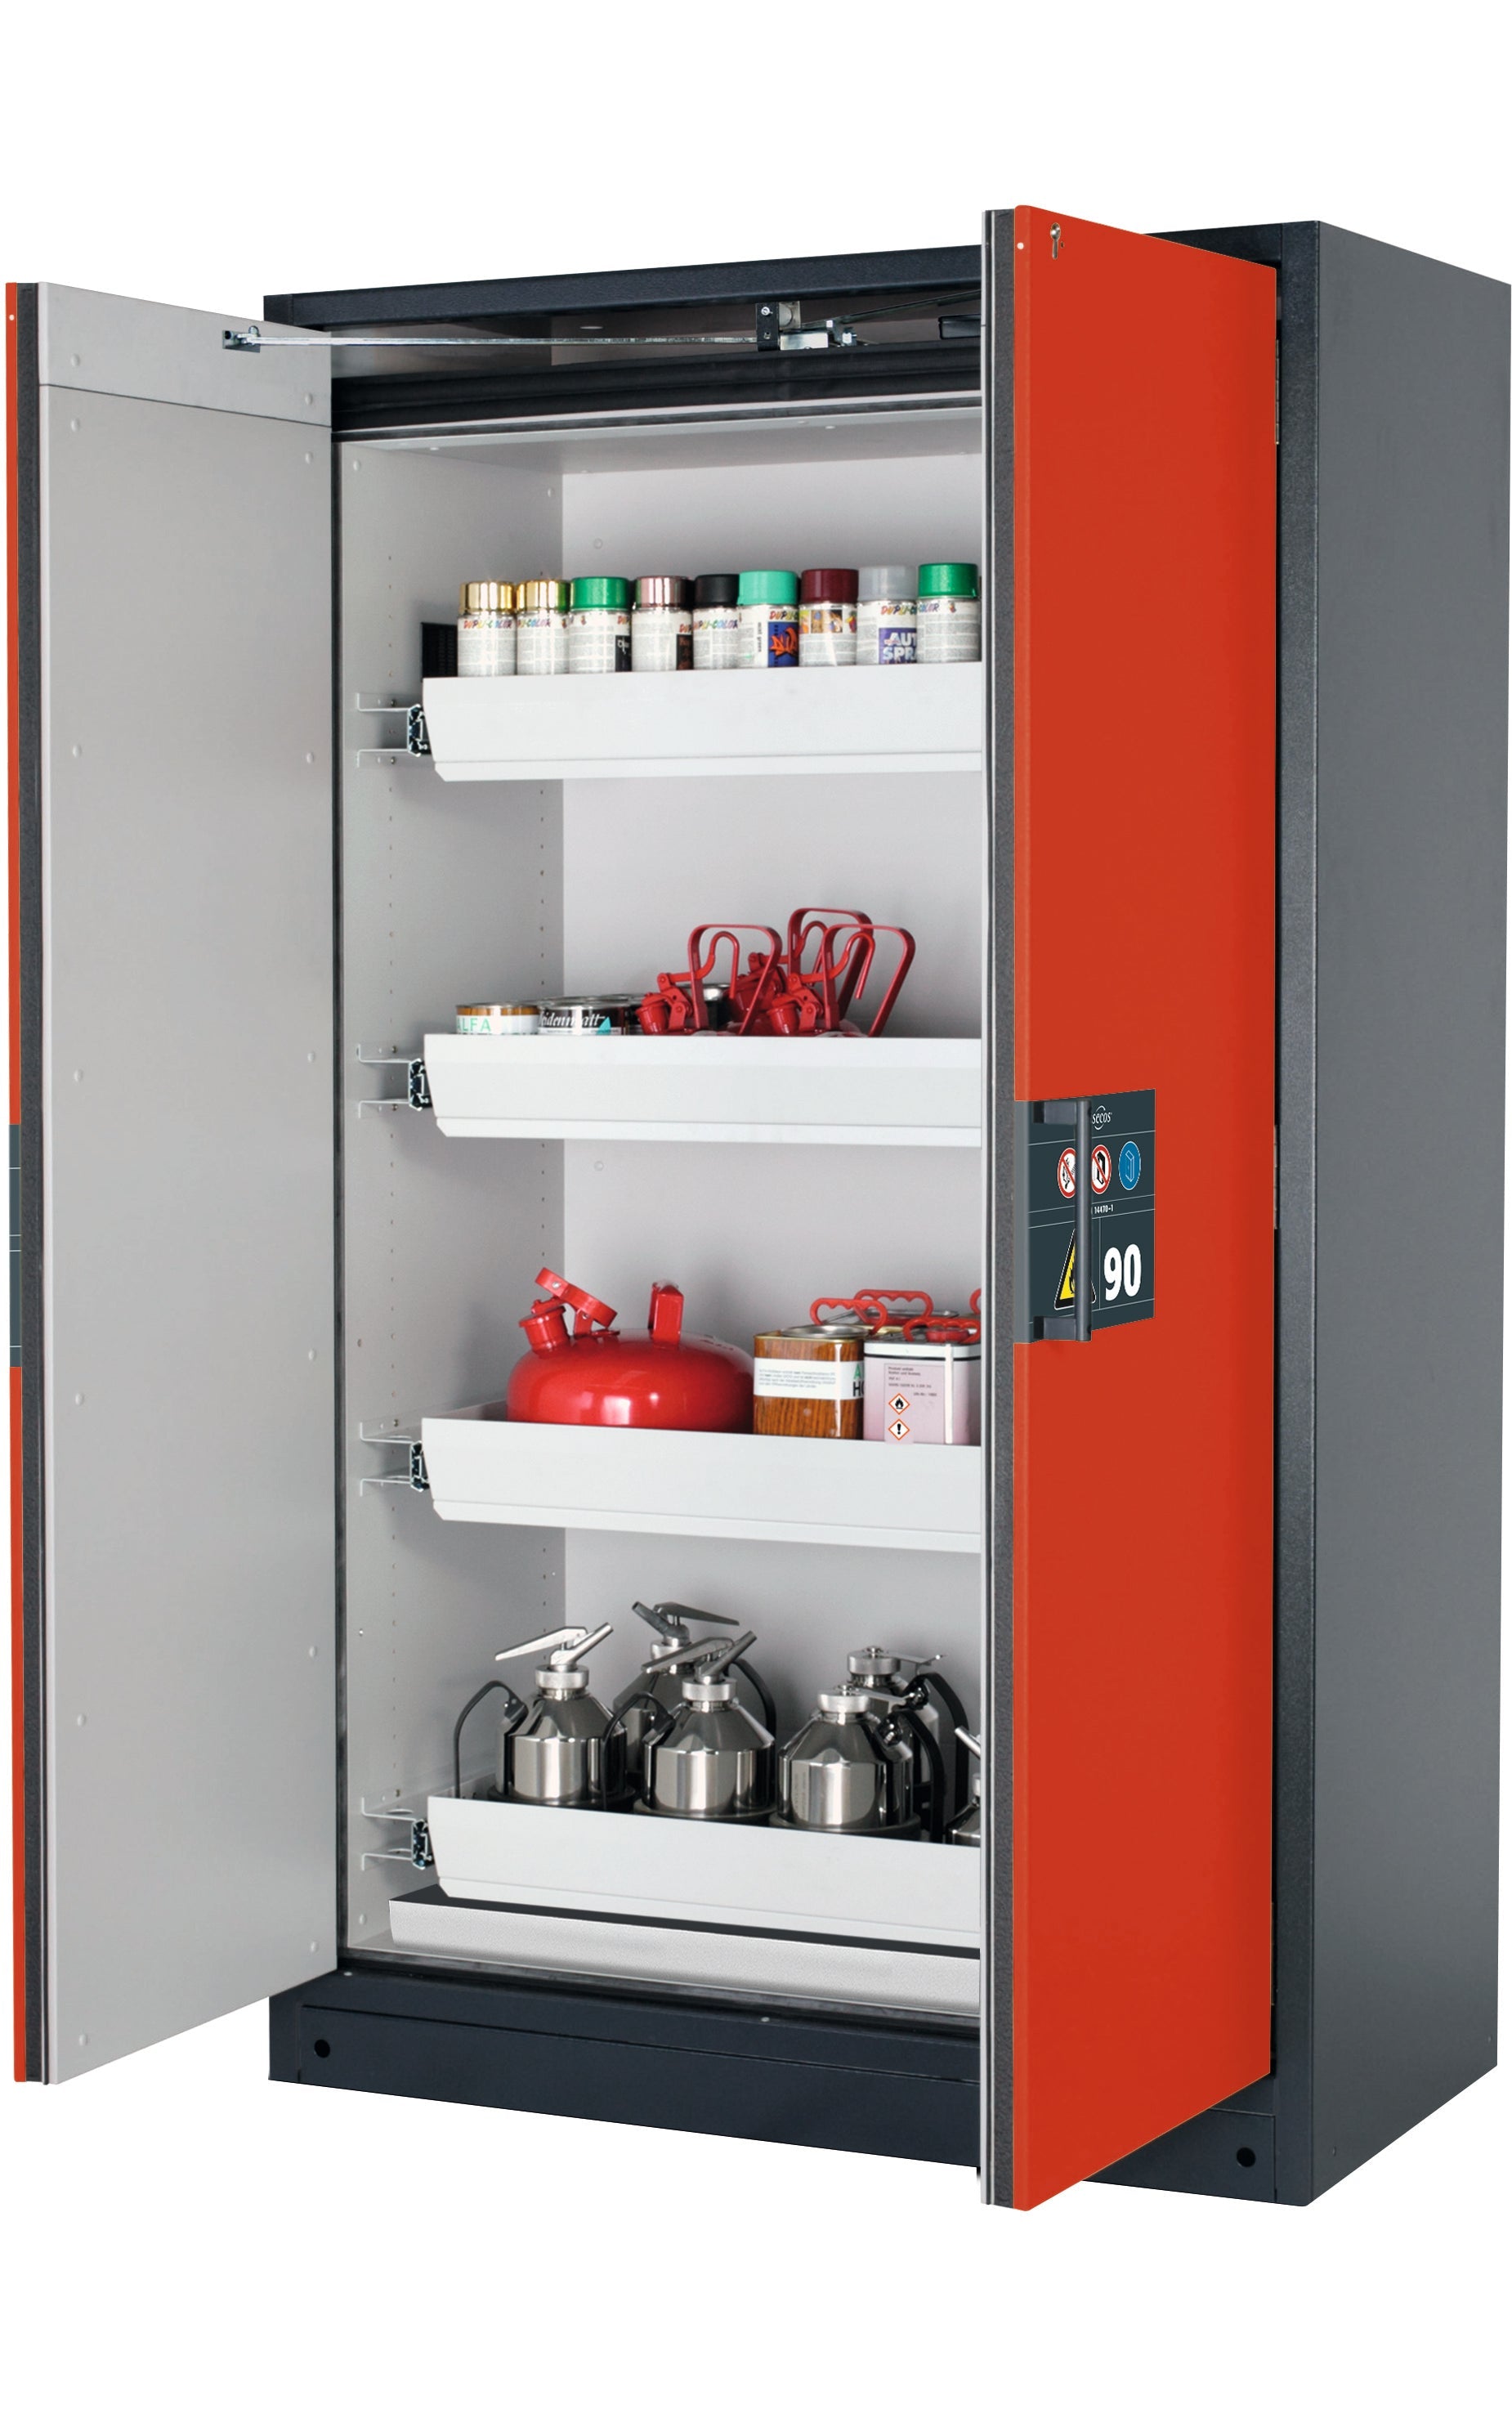 Type 90 safety storage cabinet Q-PEGASUS-90 model Q90.195.120.WDAC in traffic red RAL 3020 with 4x drawer (standard) (sheet steel),